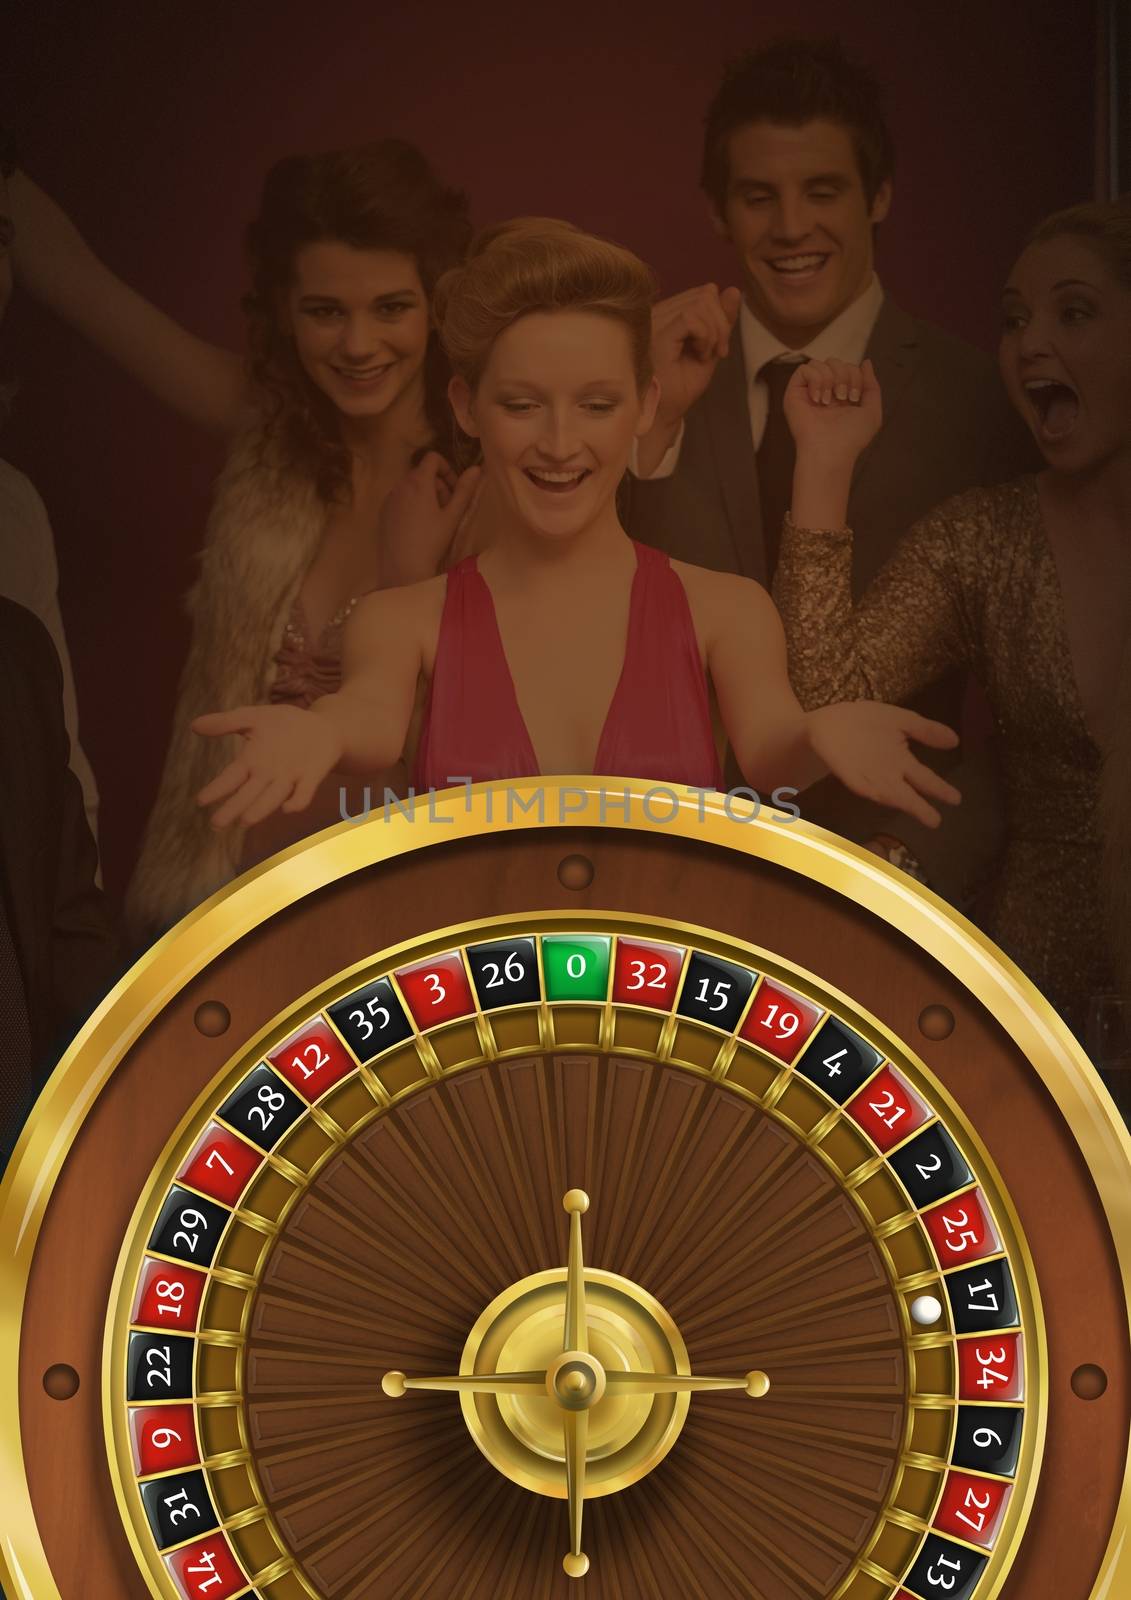 Digital composite of Roulette wheel and people having fun in background